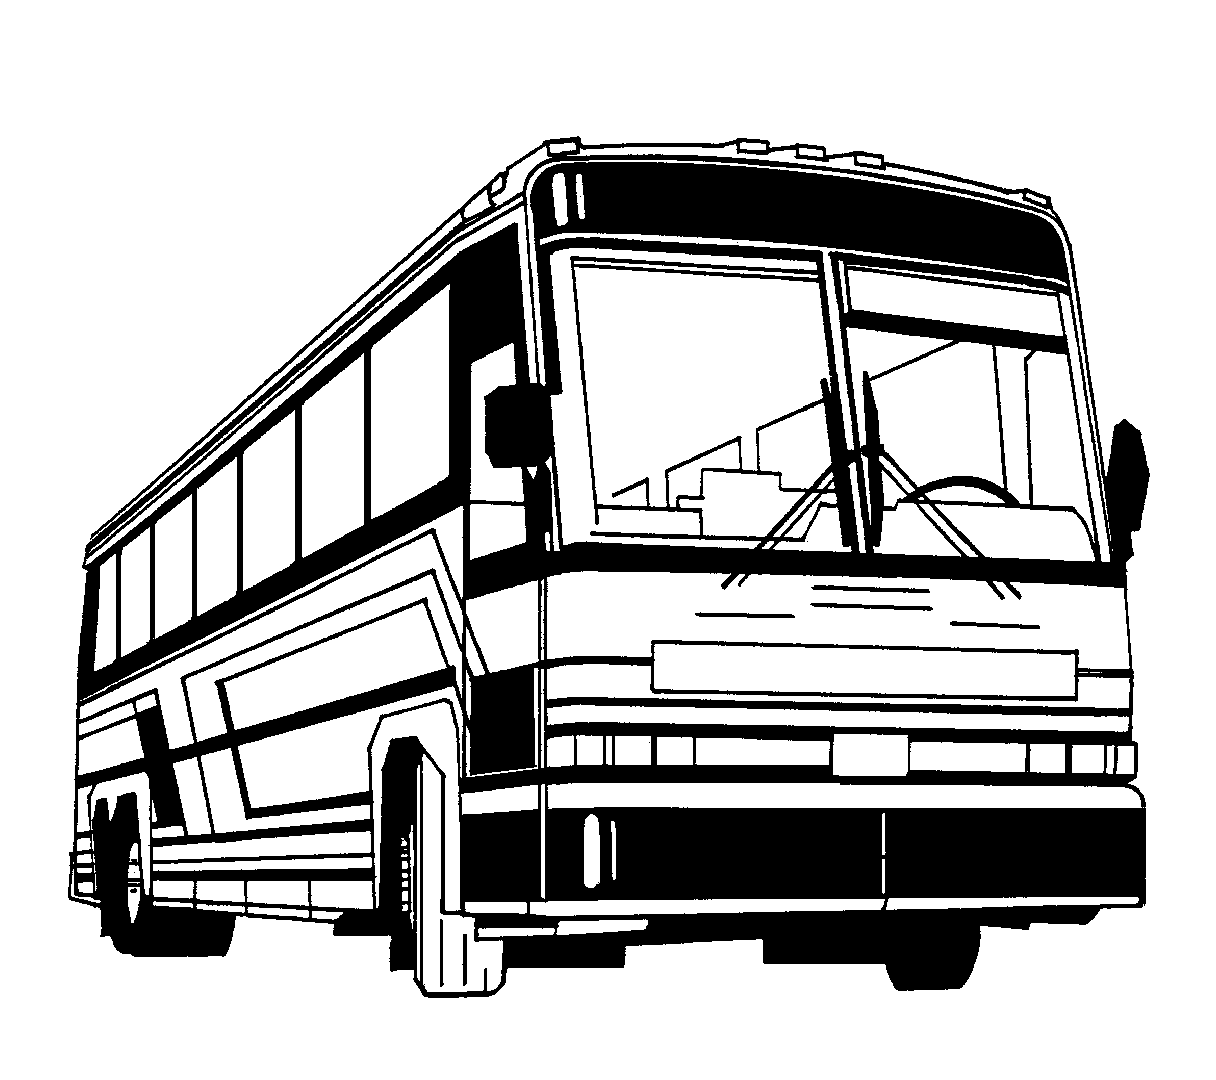 School bus  black and white school bus clip art black and white free clipart 9